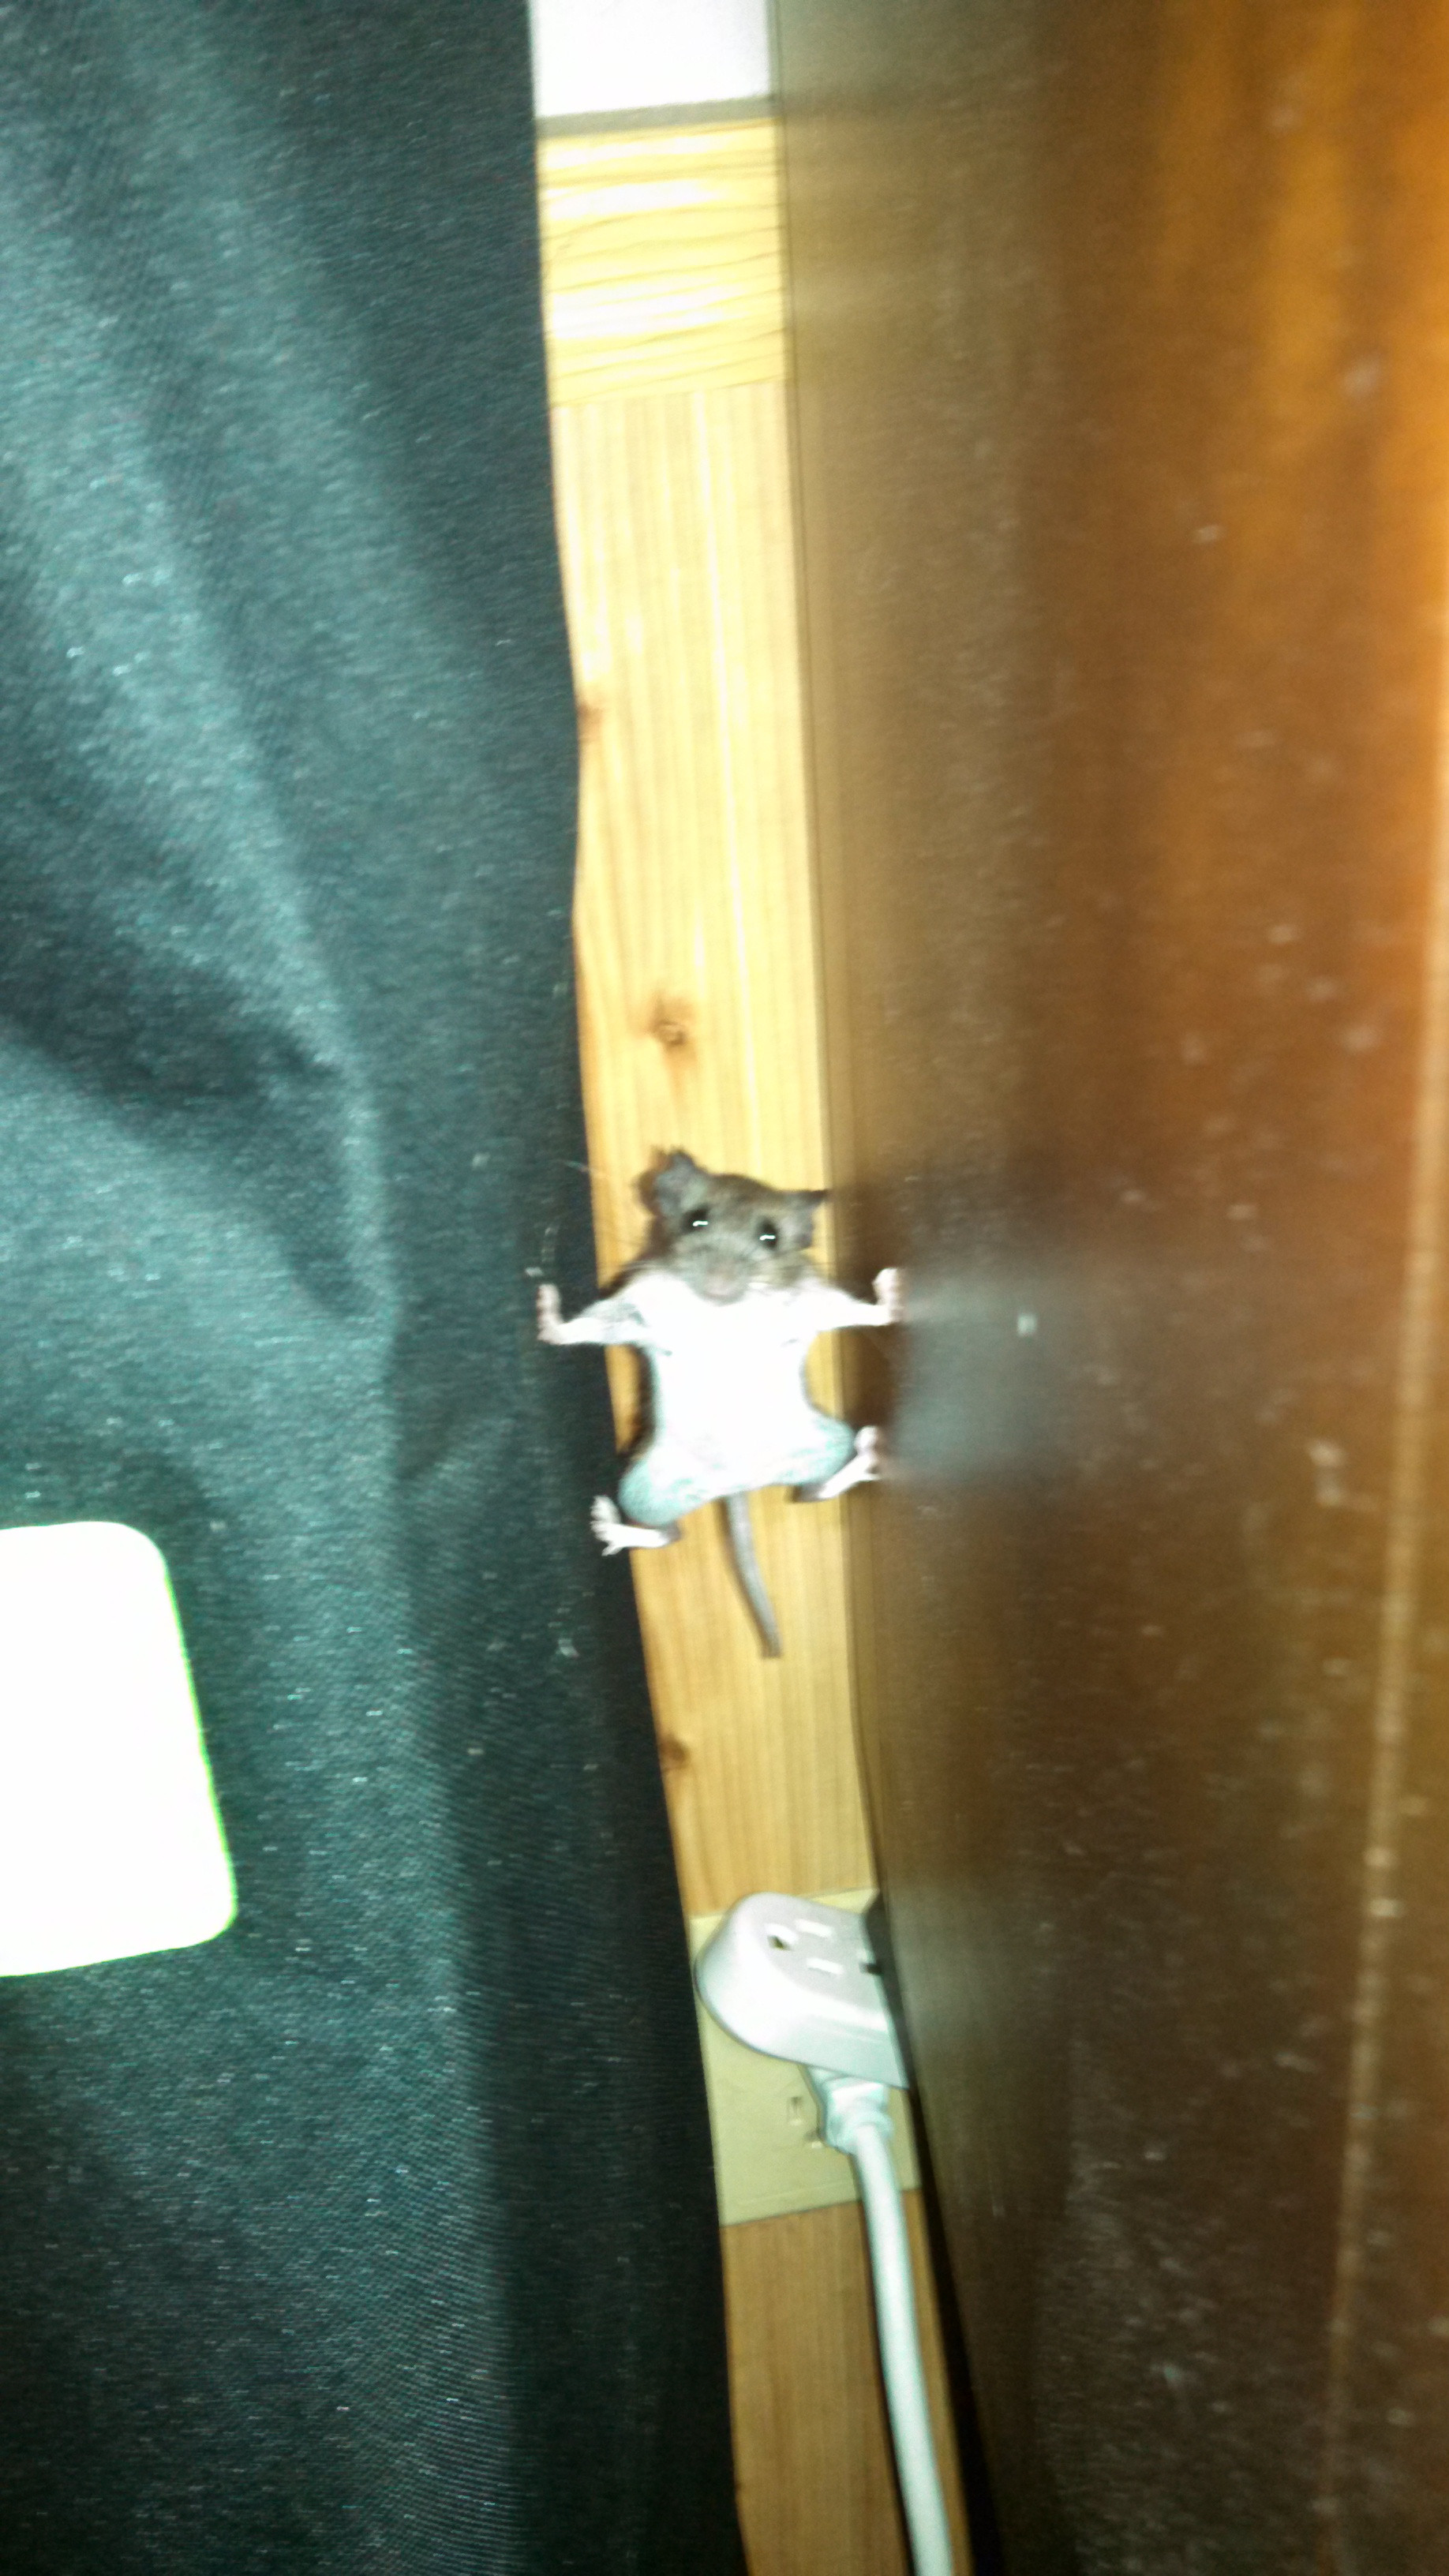 A mouse that went into Mission Impossible mode!